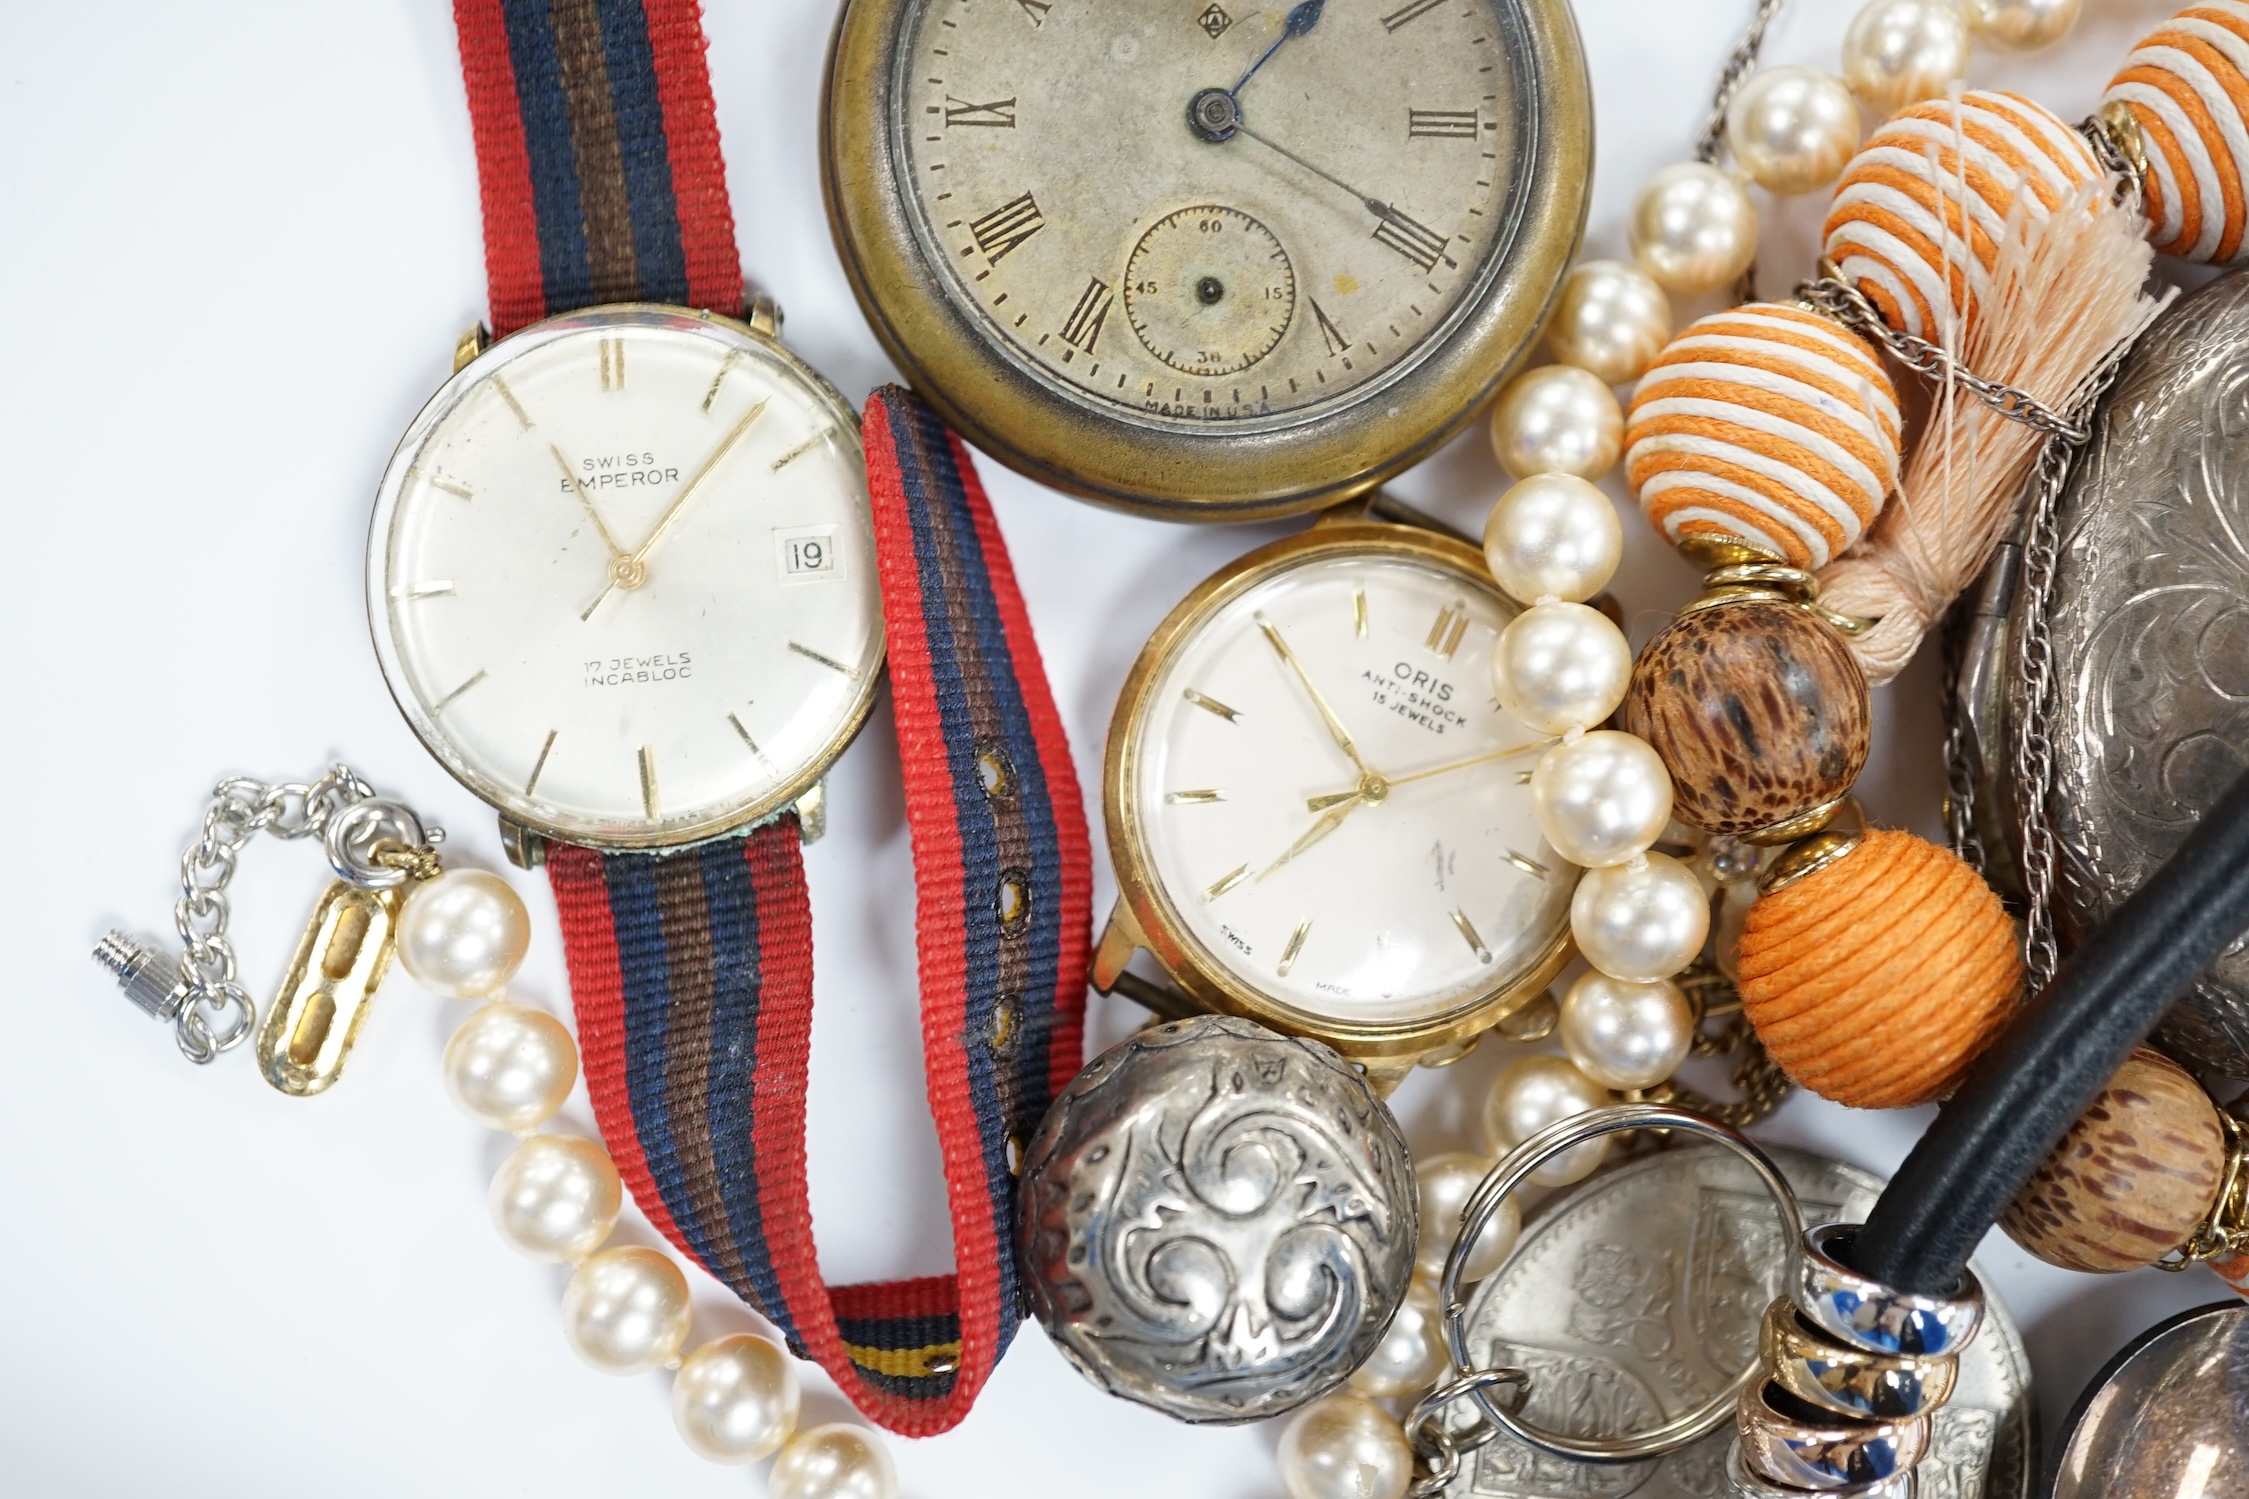 A quantity of assorted costume jewellery and other items including wrist watches, pocket watches and coins.